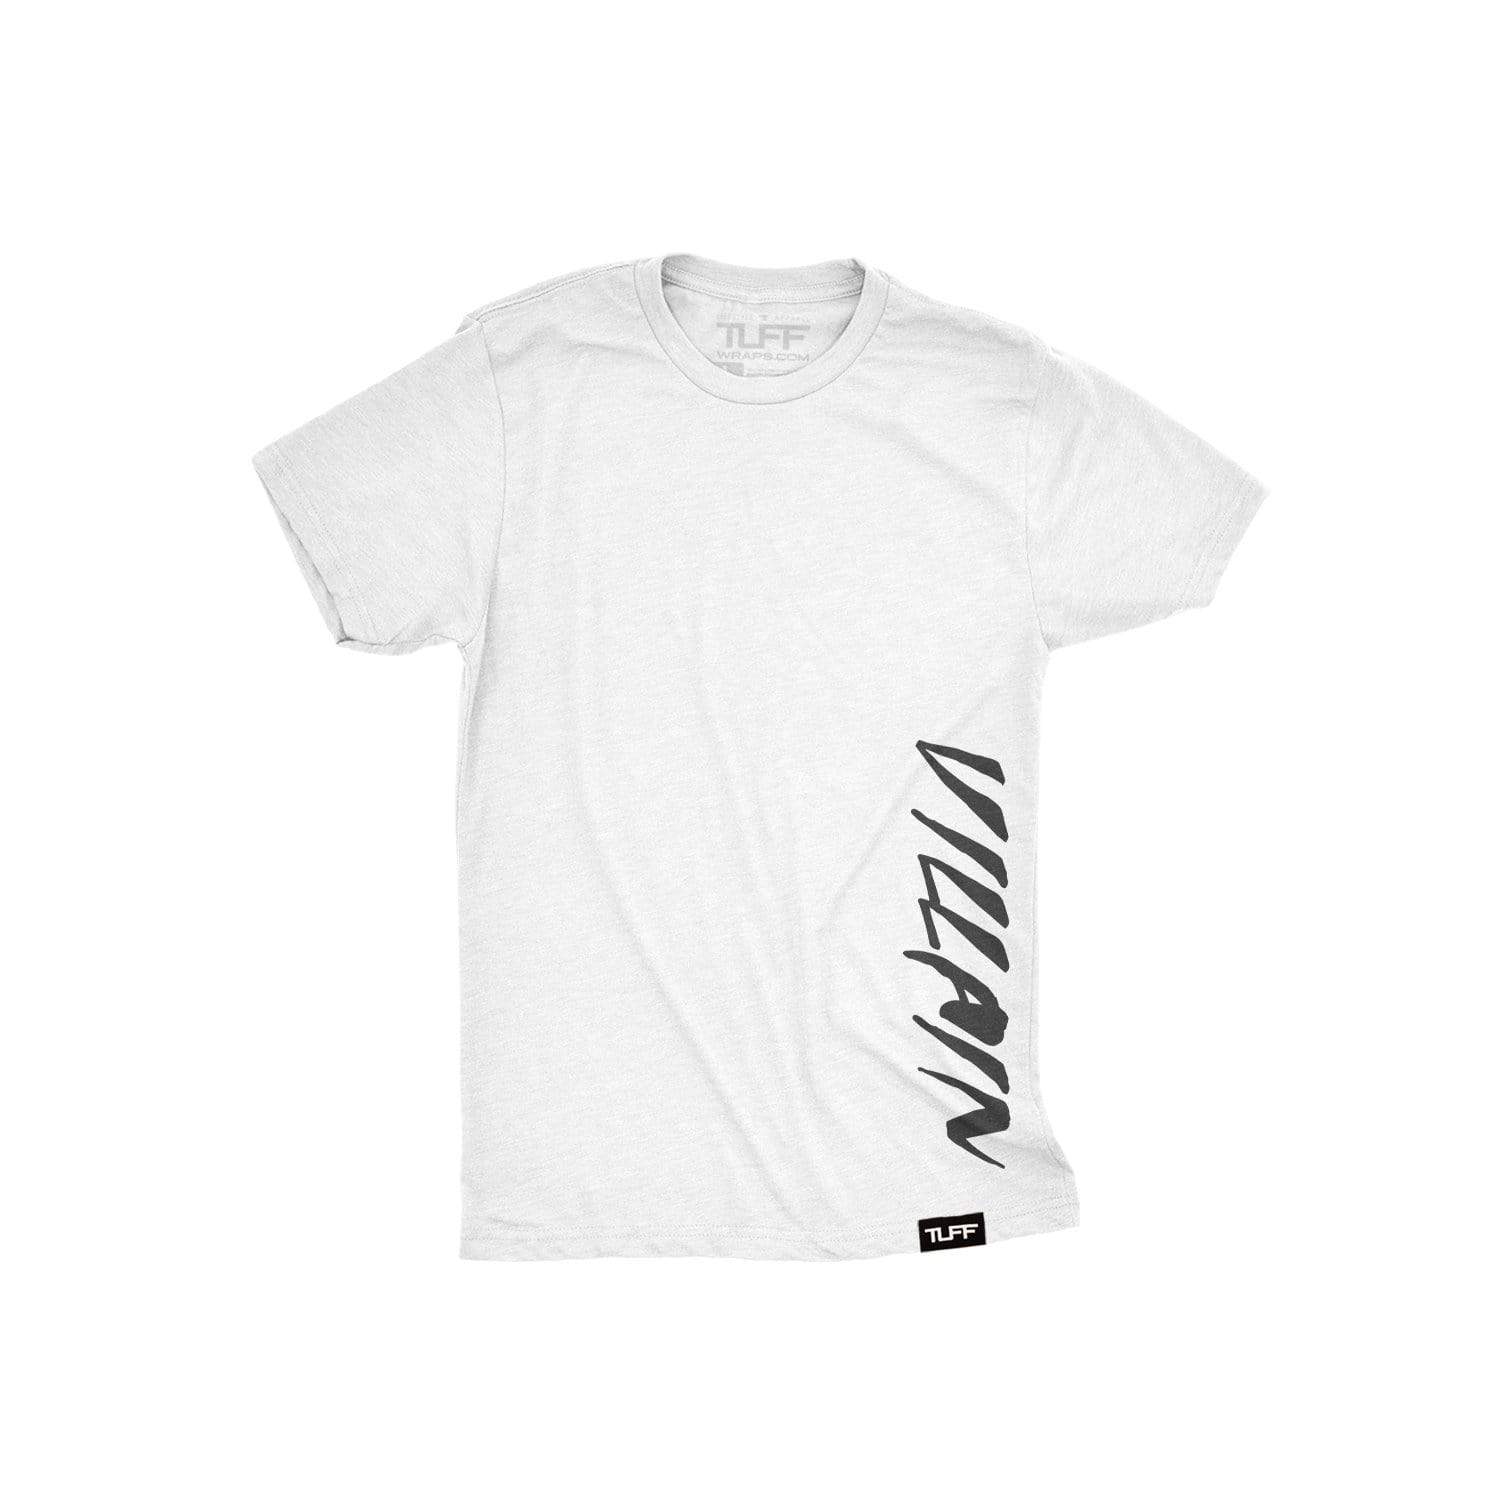 Villain Side Youth Tee Youth T-shirt